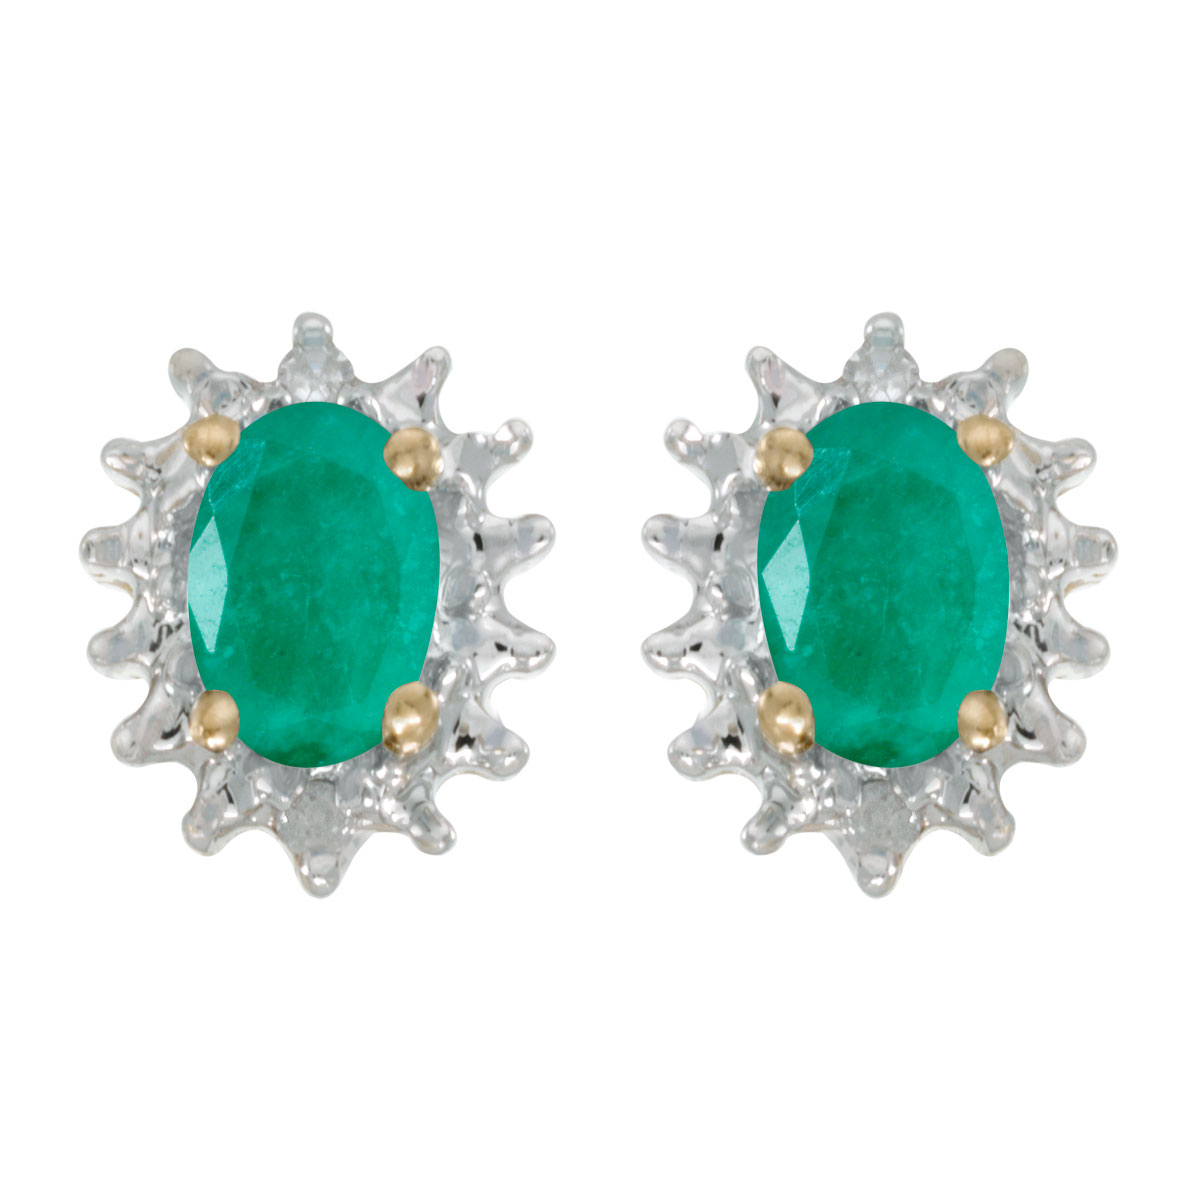 JCX1993: These 14k yellow gold oval emerald and diamond earrings feature 6x4 mm genuine natural emeralds with a 0.62 ct total weight and .04 ct diamonds.